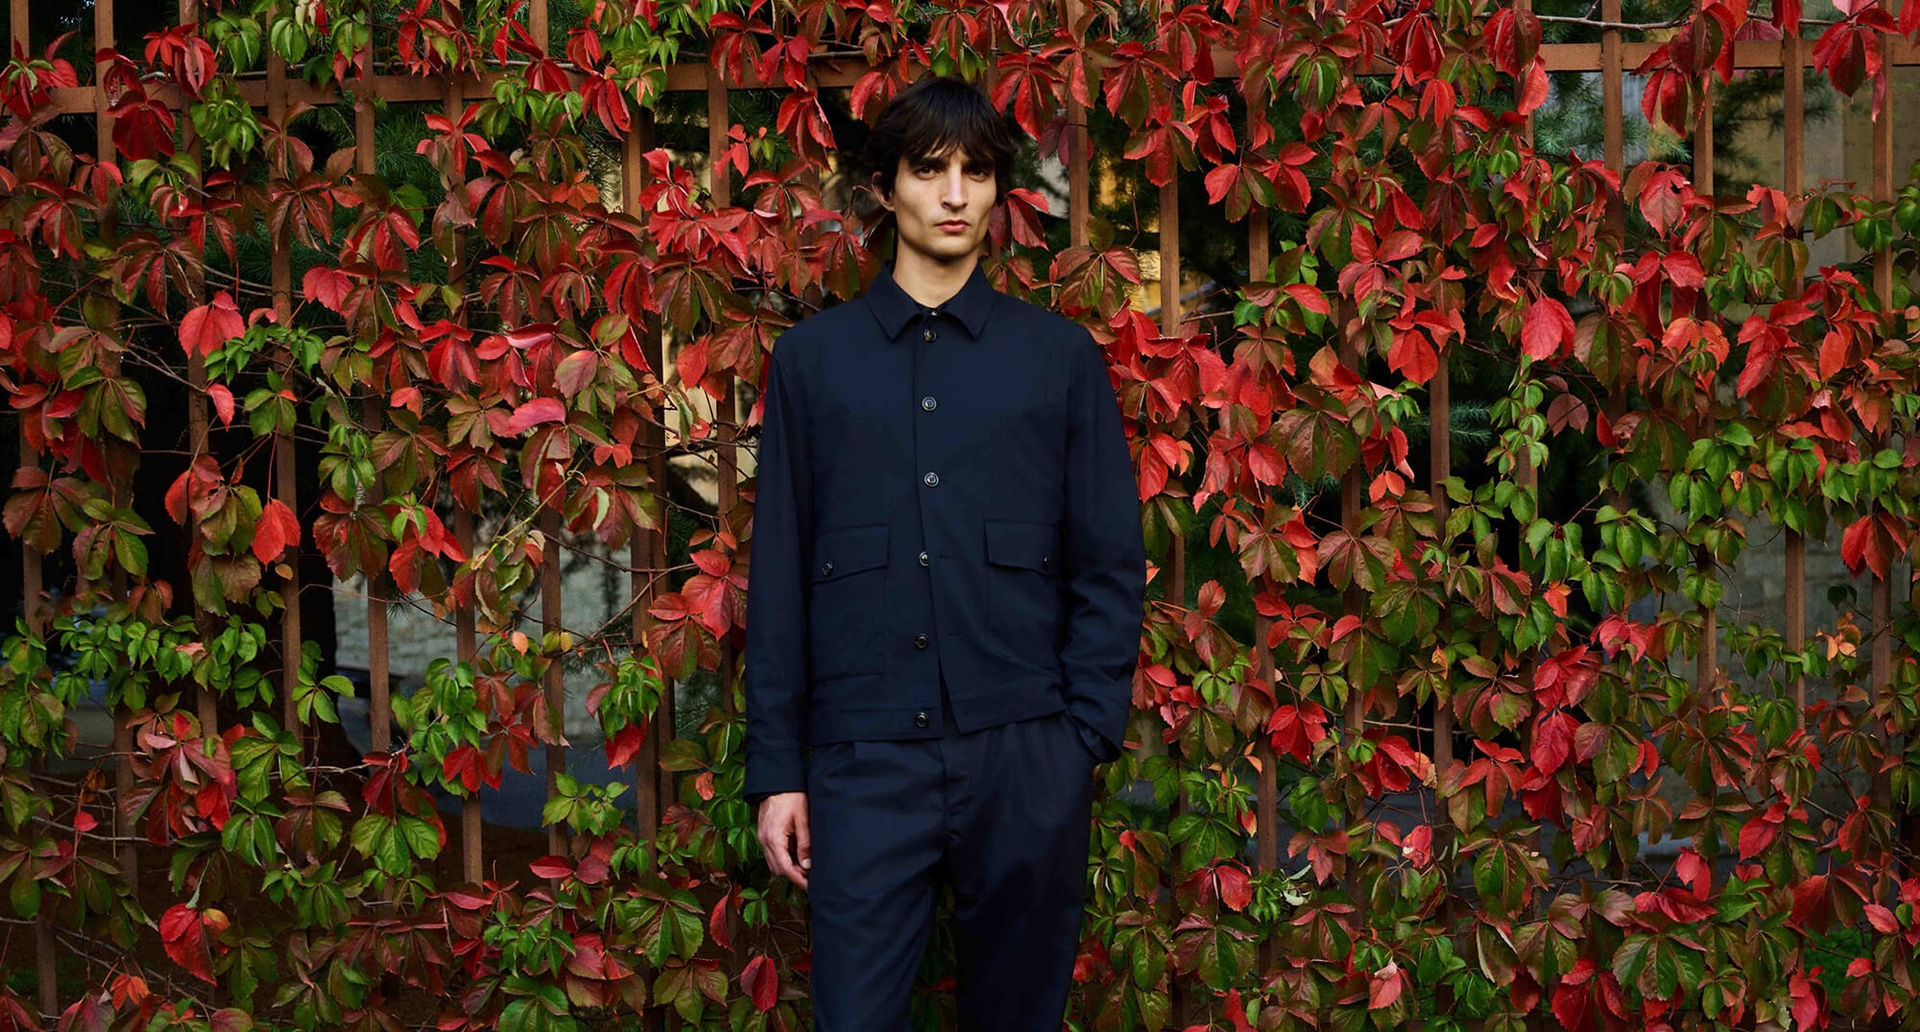 A man wearing a navy Valstar Milano jacket standing in front of red and green leaves